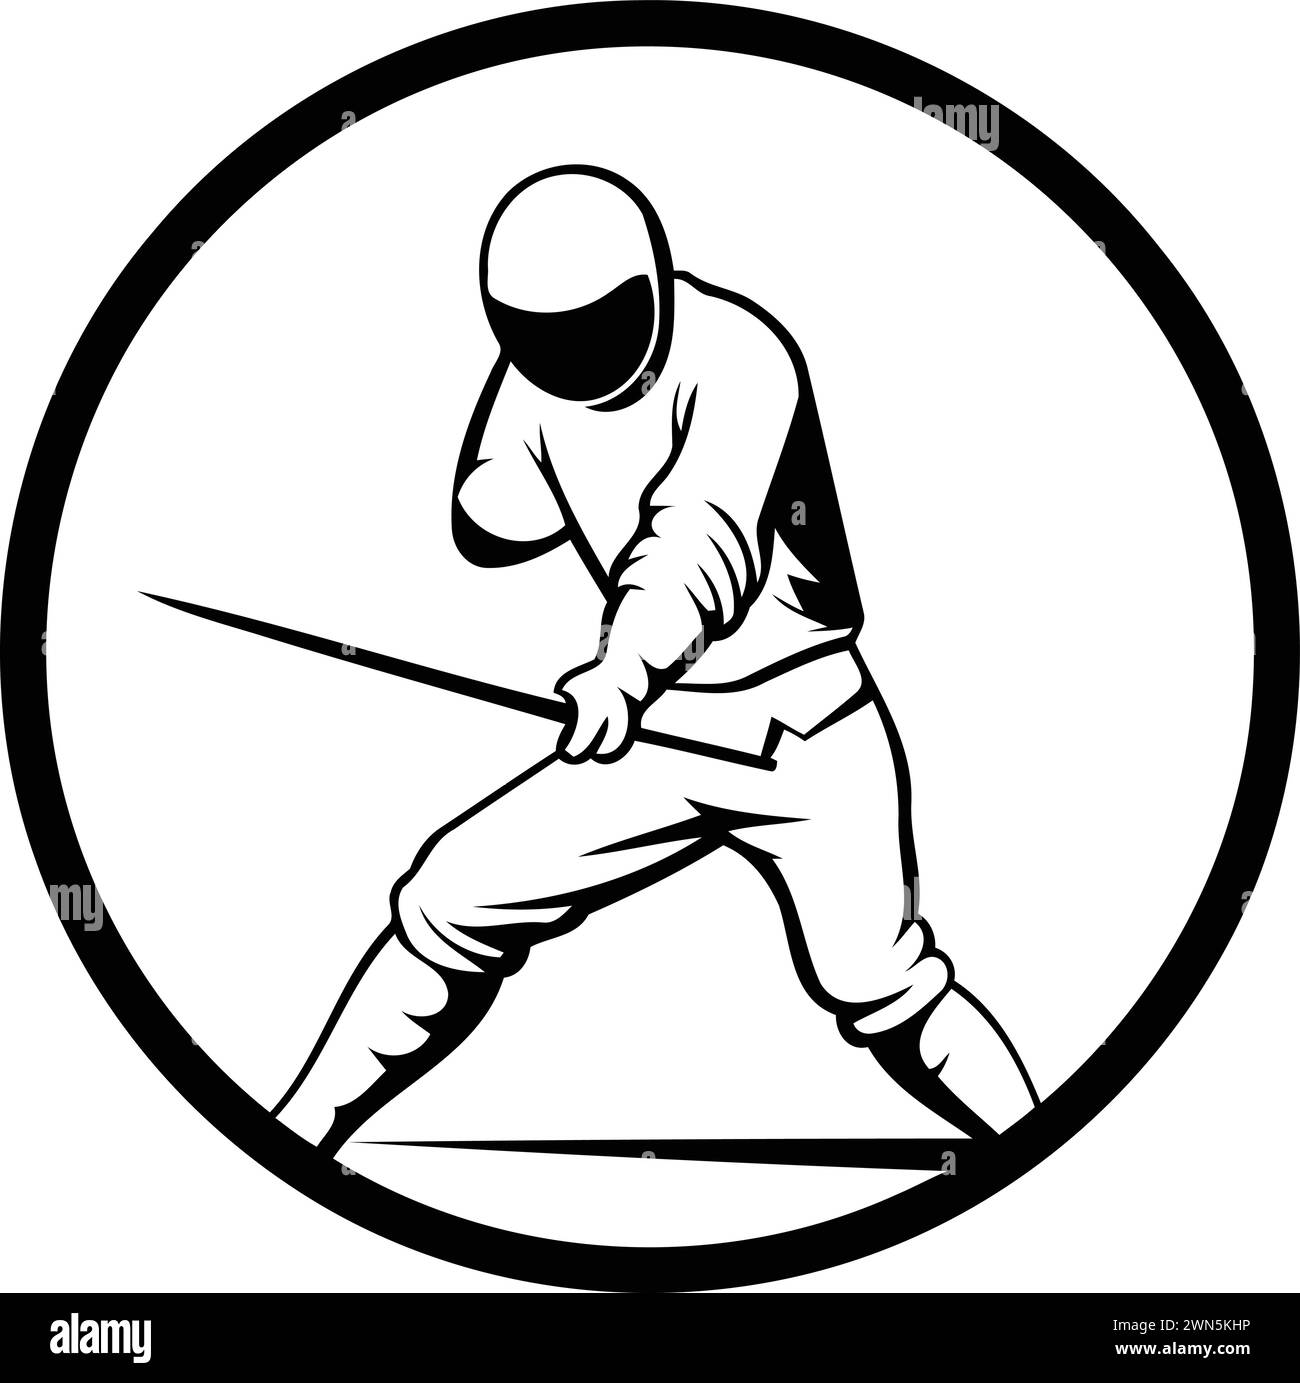 Illustration of a fencer with sword in circle done in retro woodcut style. Stock Vector